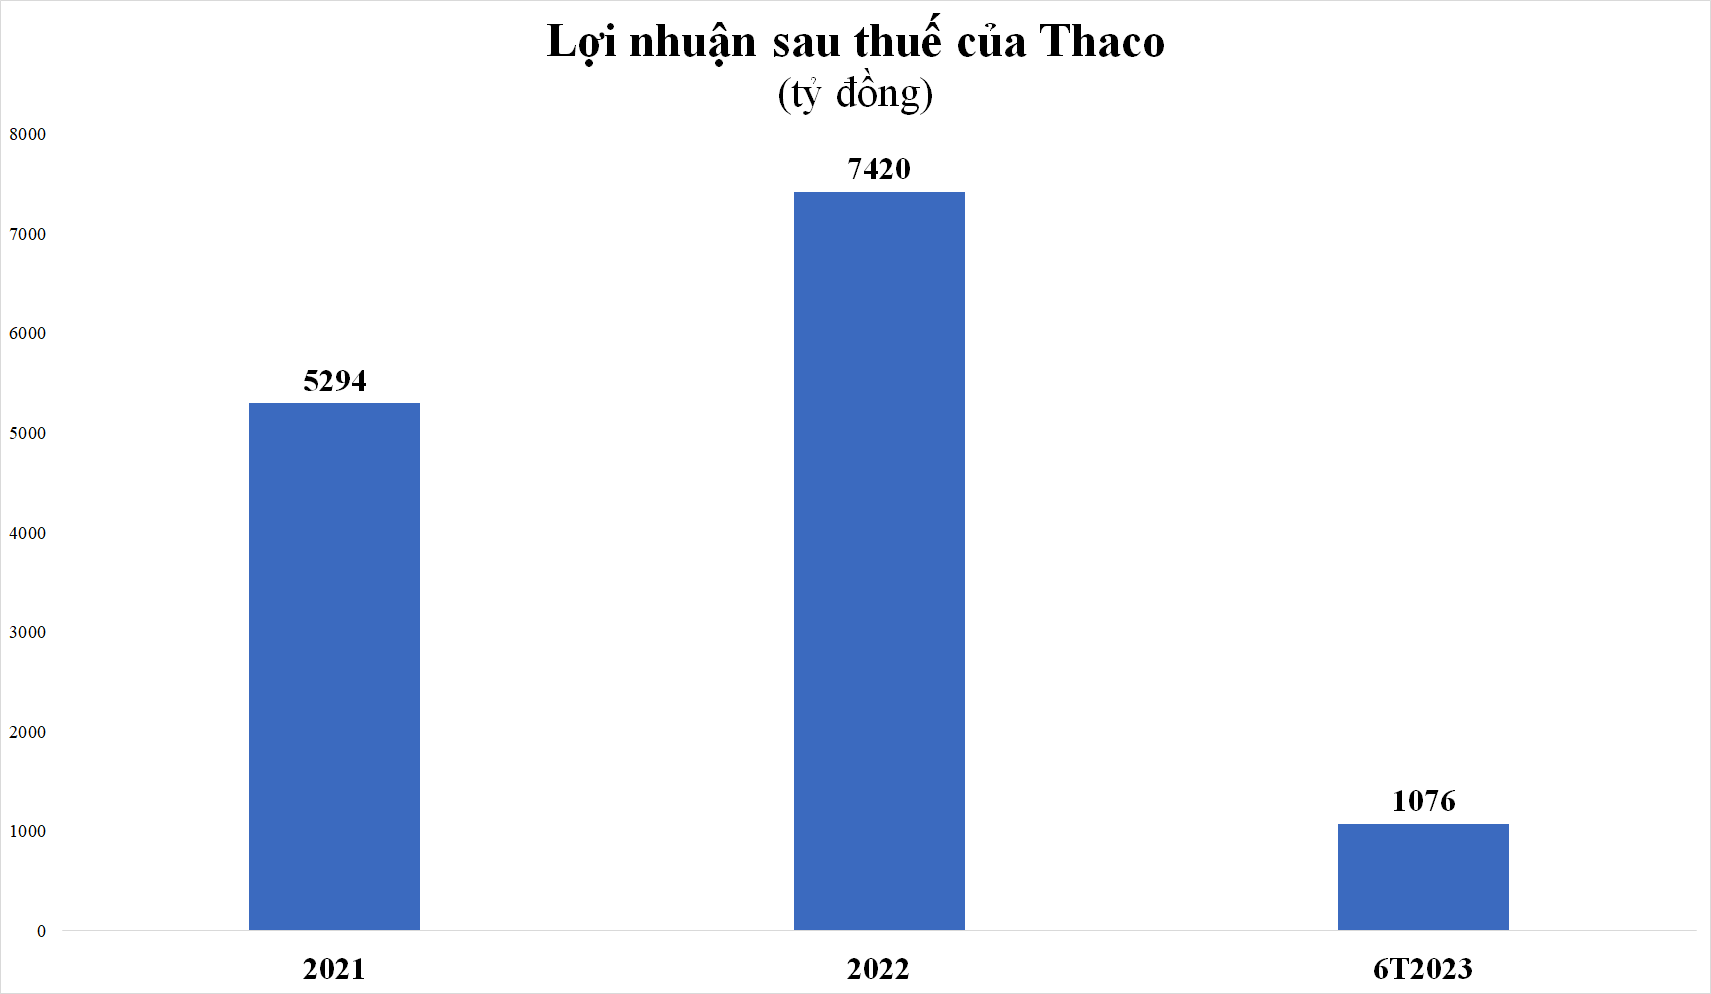 thaco1-1695950002.png